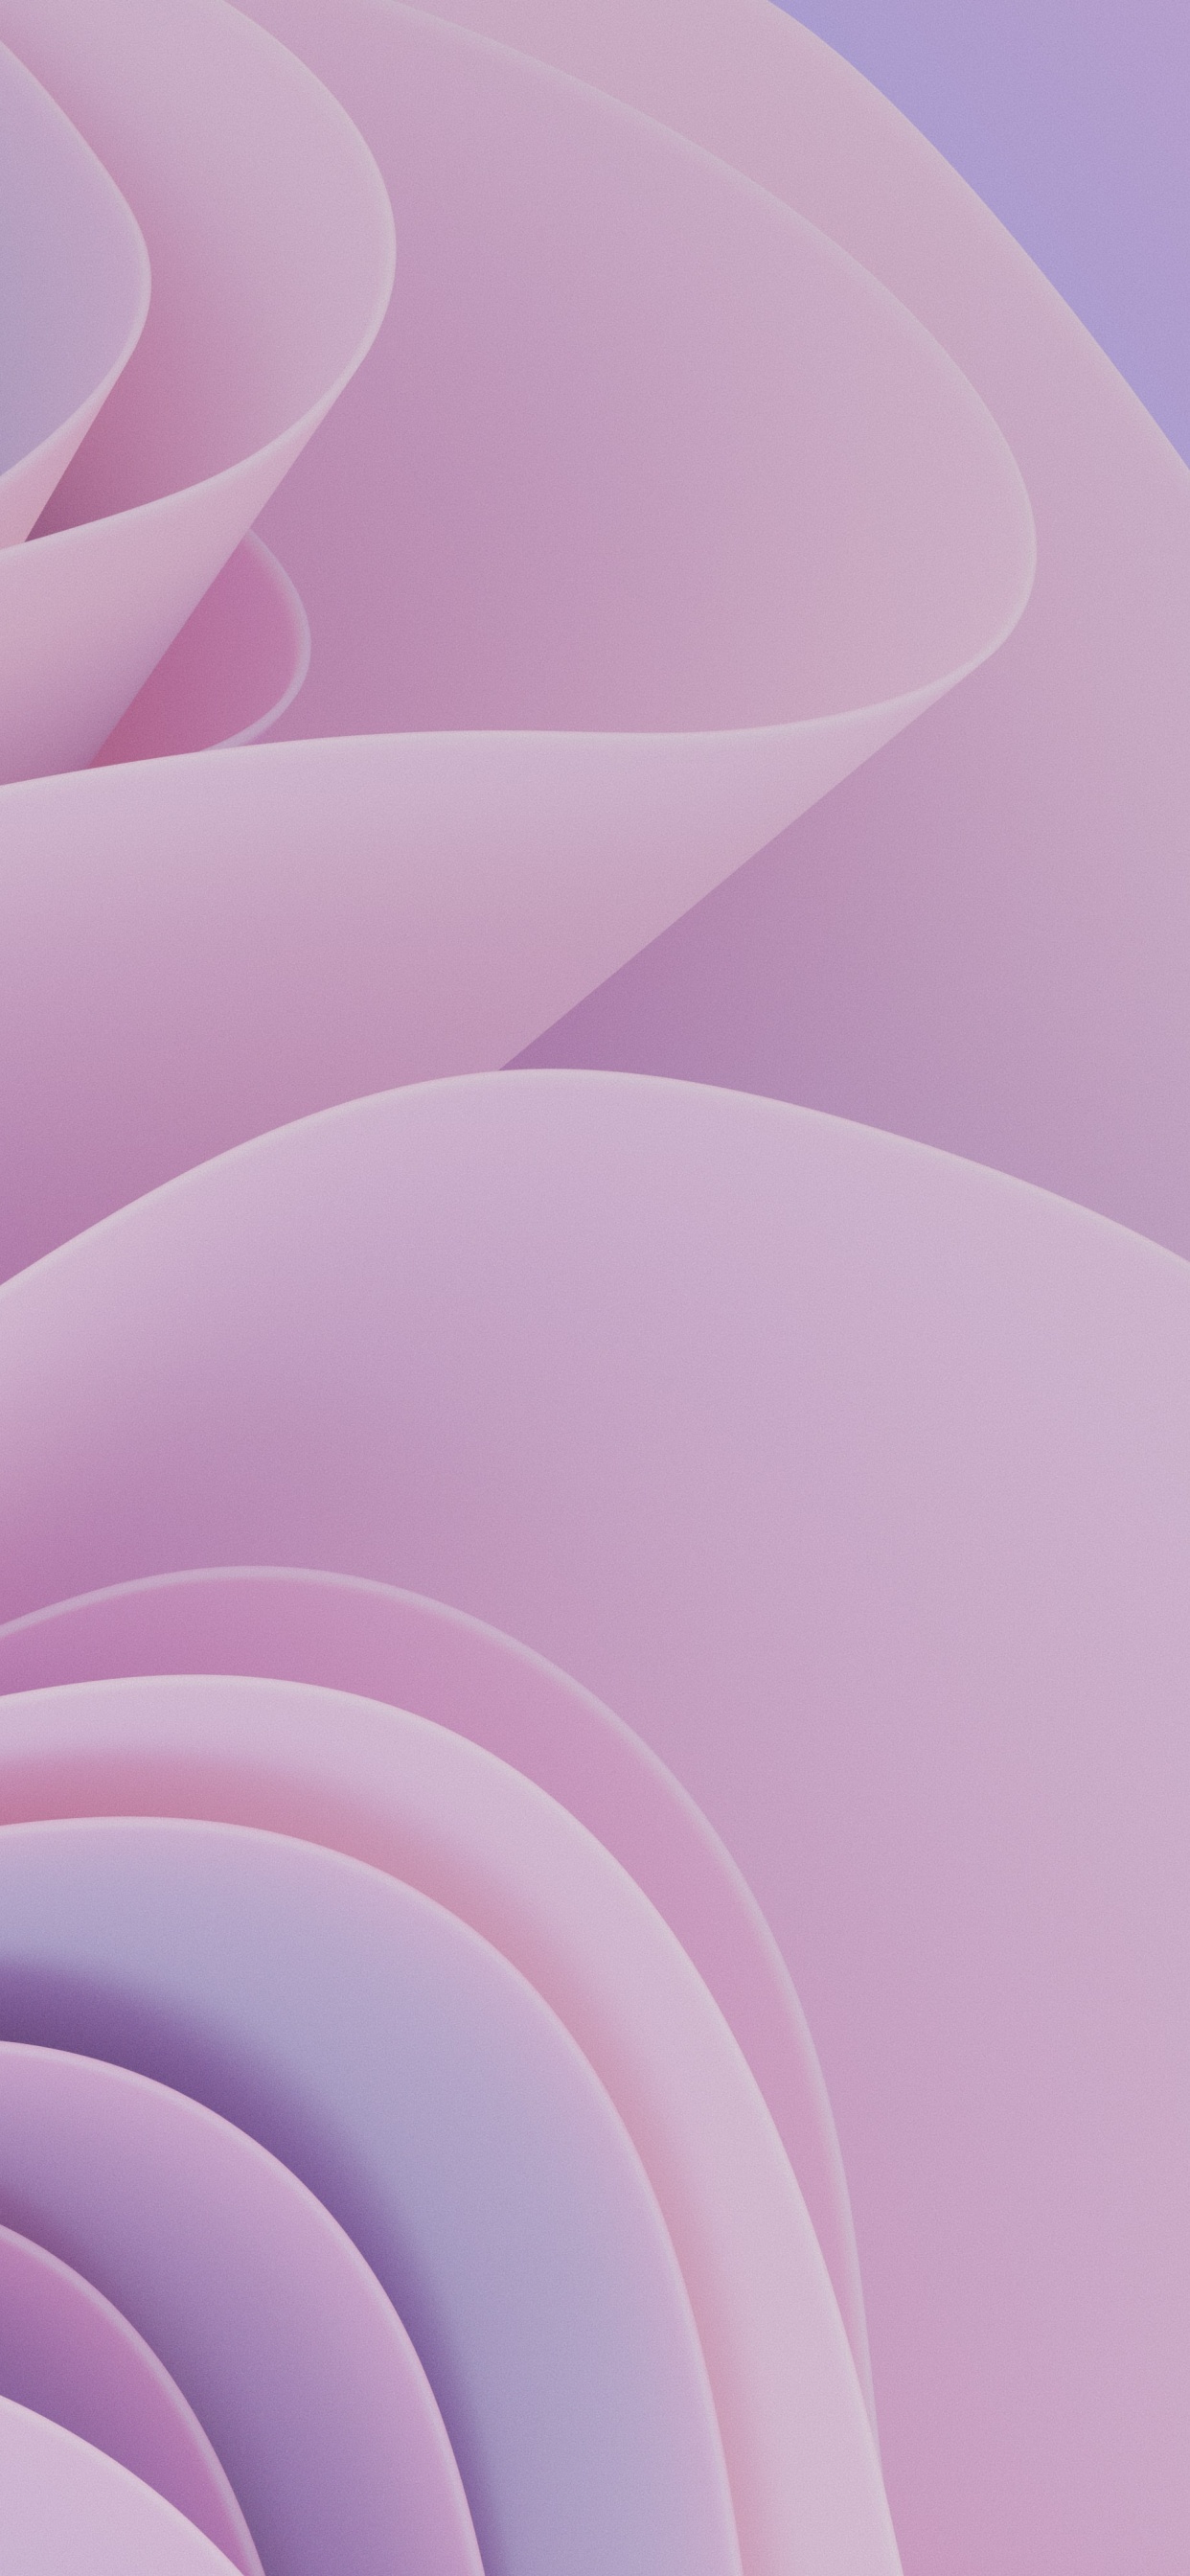 3d Render Wallpaper 4k Waves Girly Abstract 7041